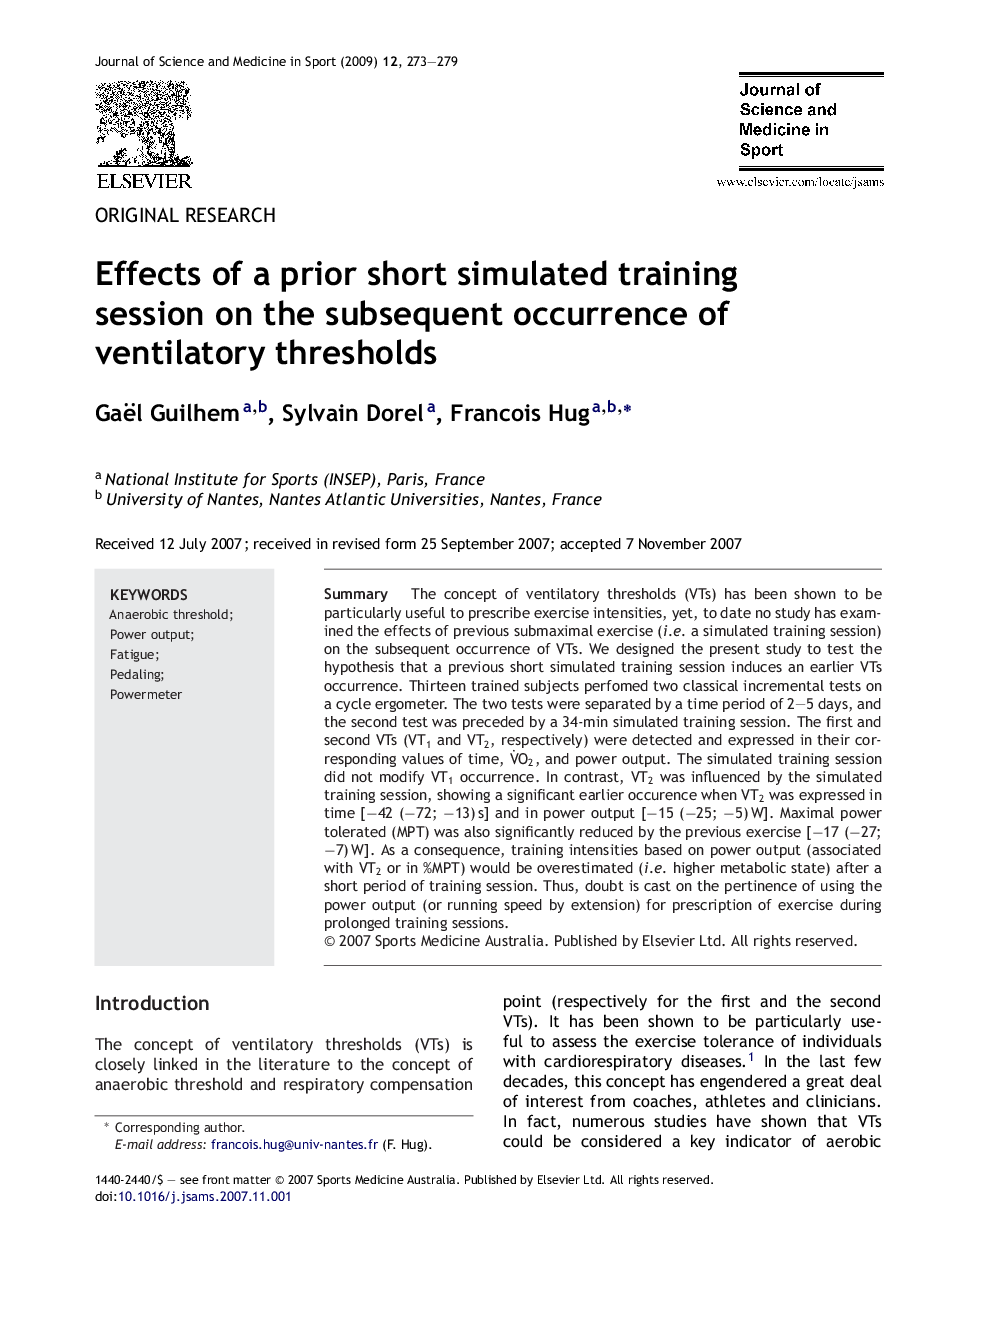 Effects of a prior short simulated training session on the subsequent occurrence of ventilatory thresholds